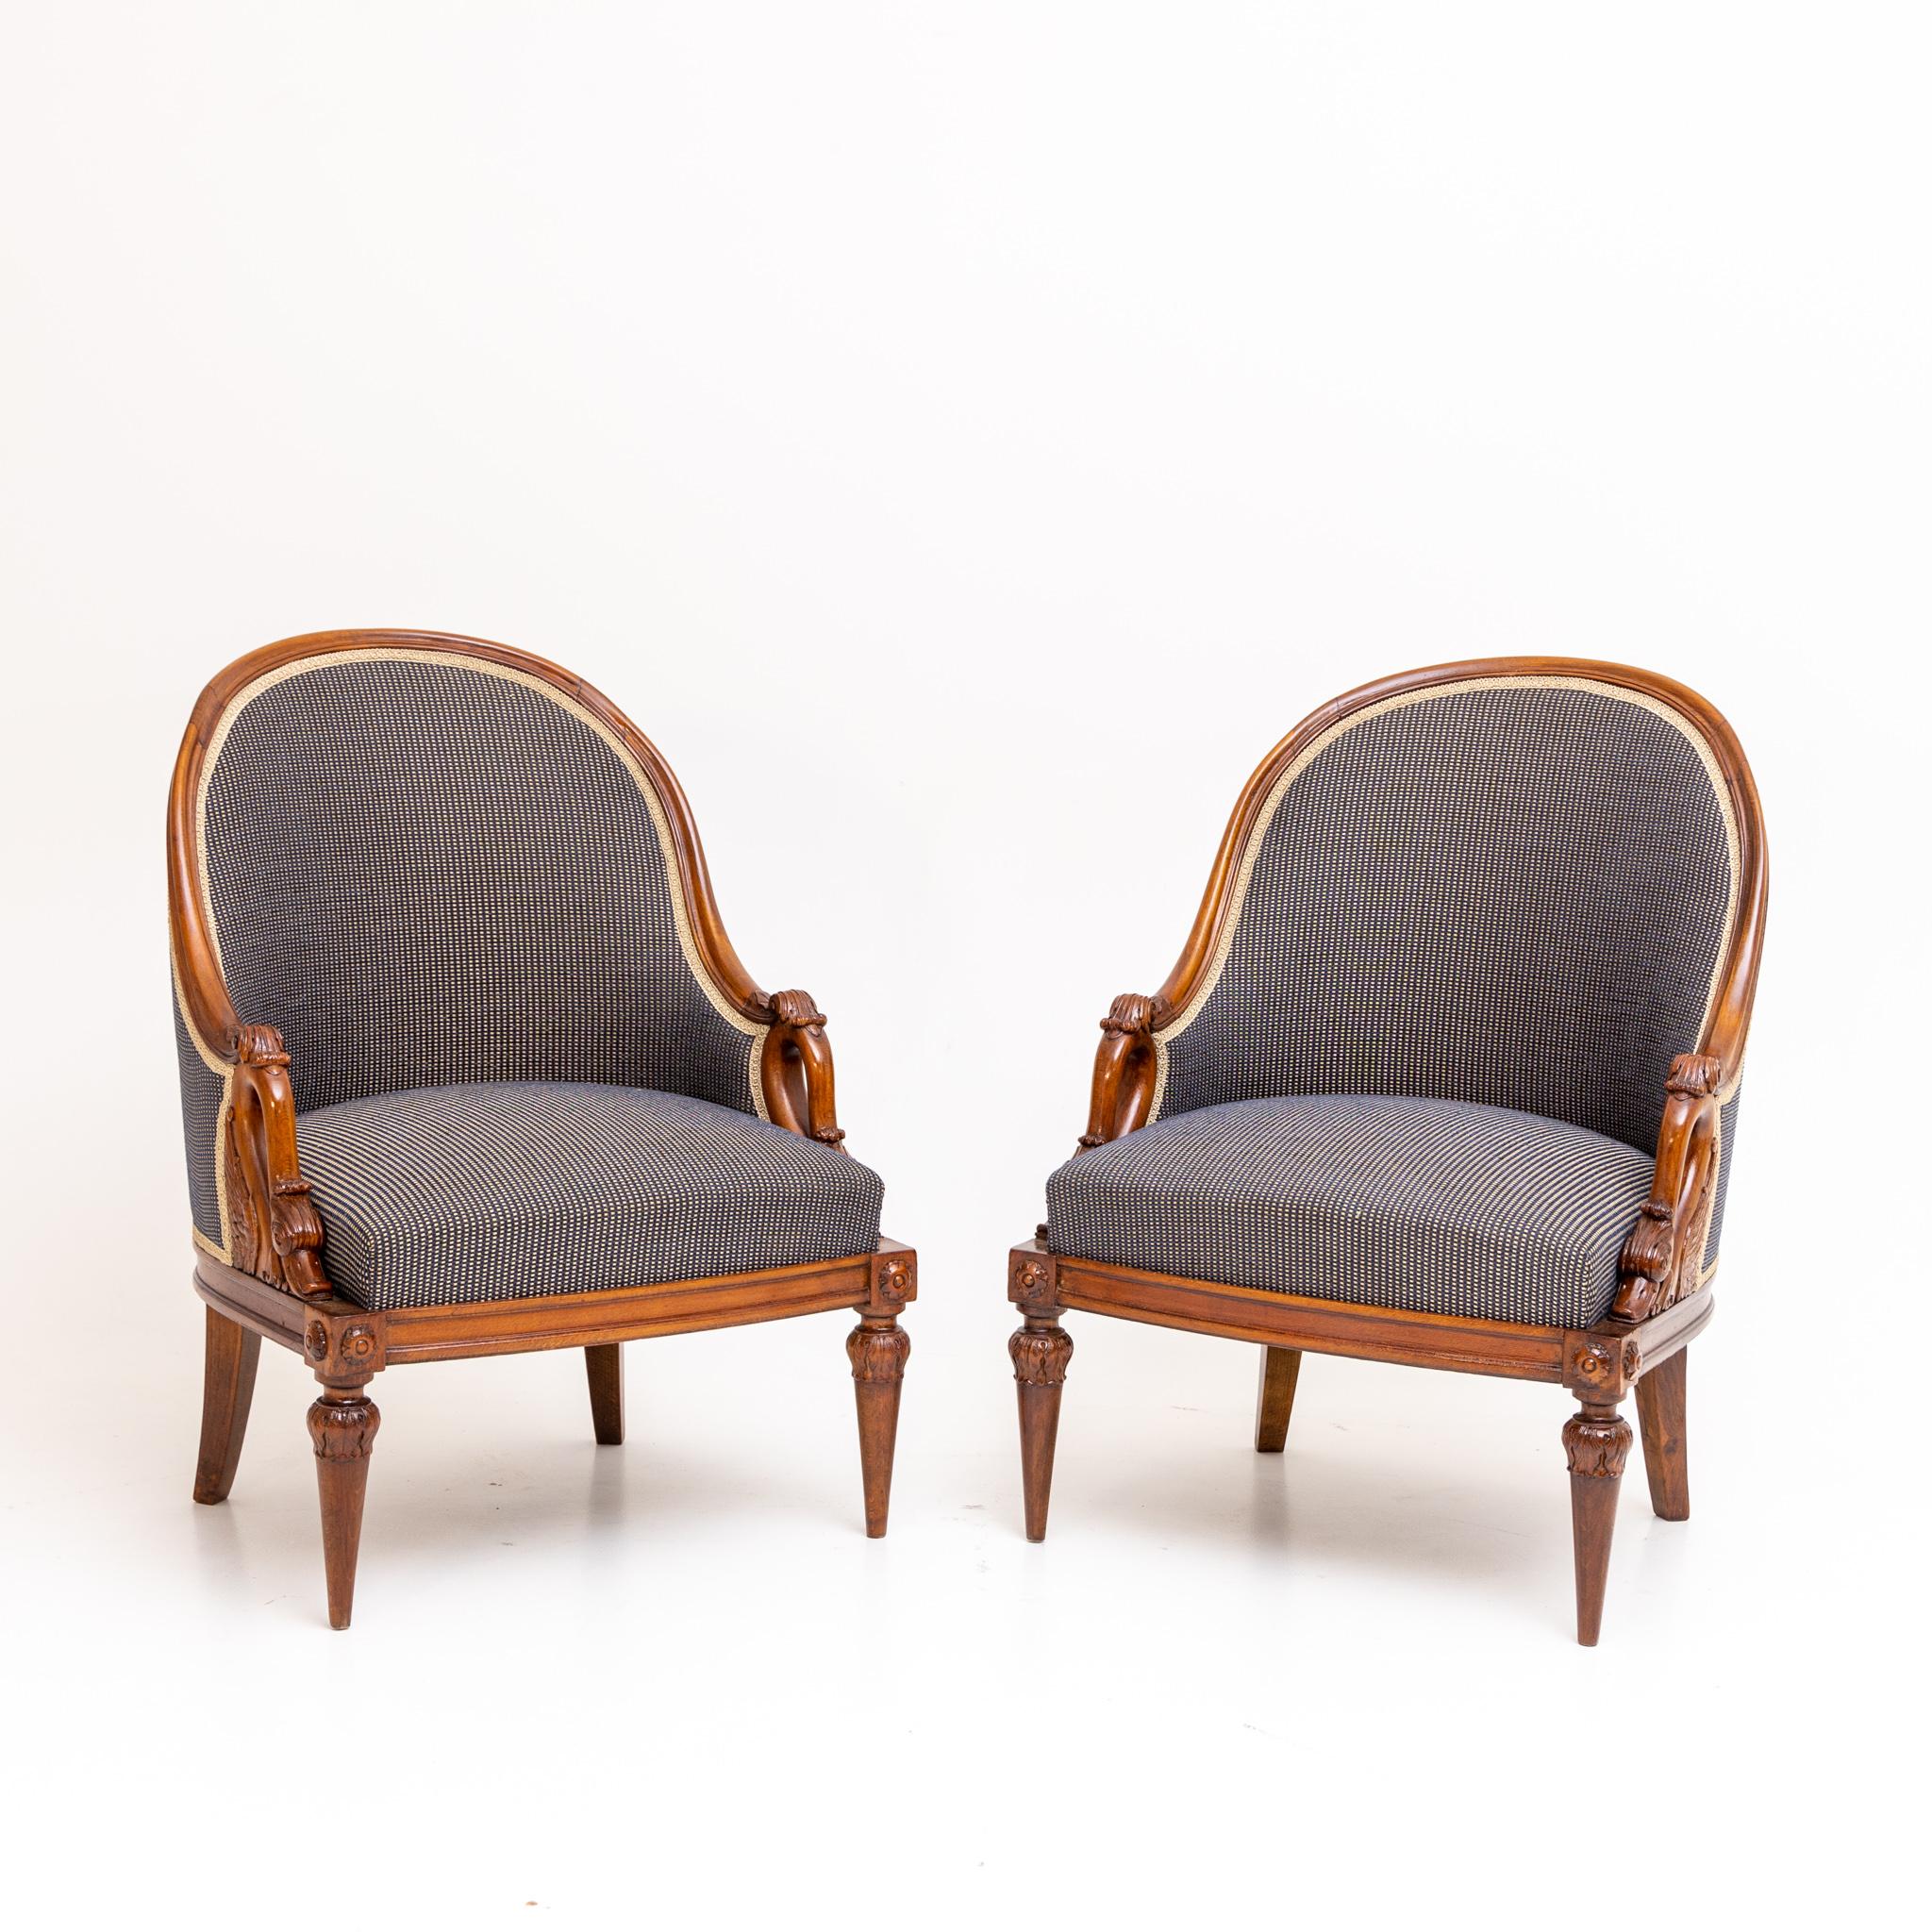 Other Empire style Bergere Chairs, 2nd Half 19th Century